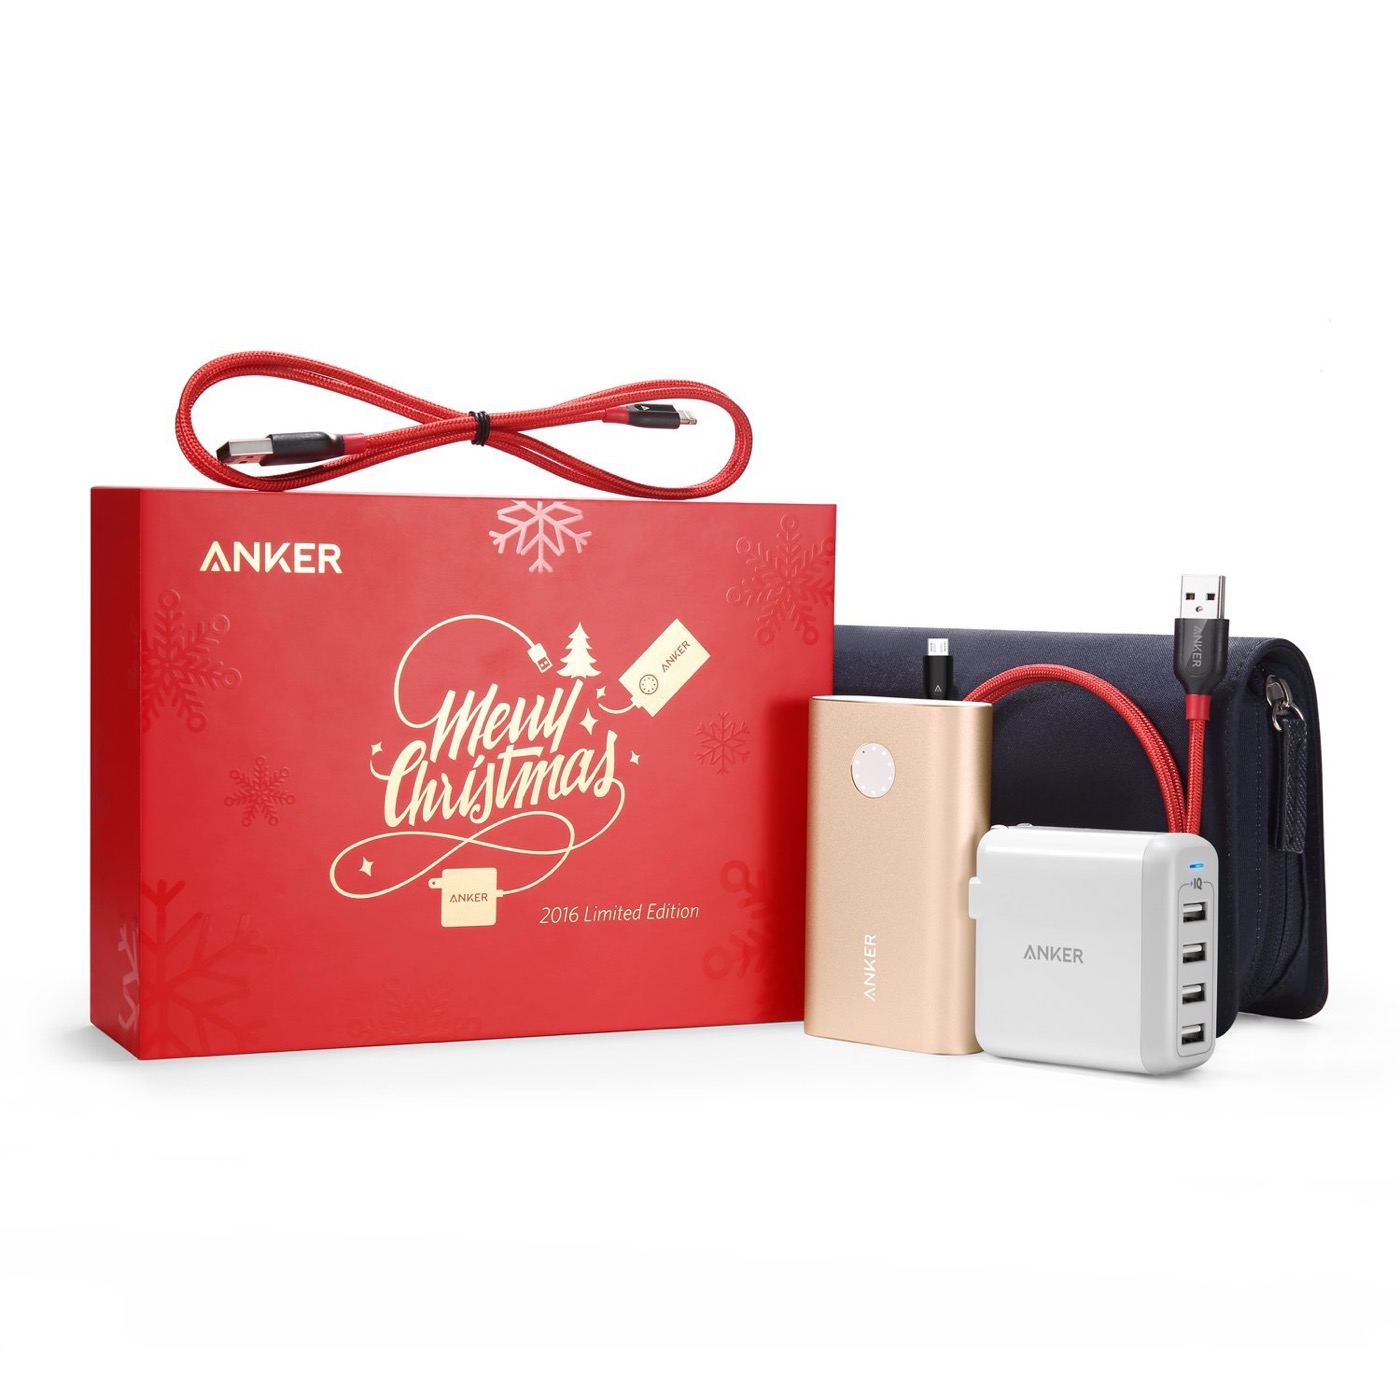 Anker、クリスマスのプレゼントに最適な｢Anker Christmas PowerPack｣を数量限定で発売 − バッテリーや高速充電器などのセット